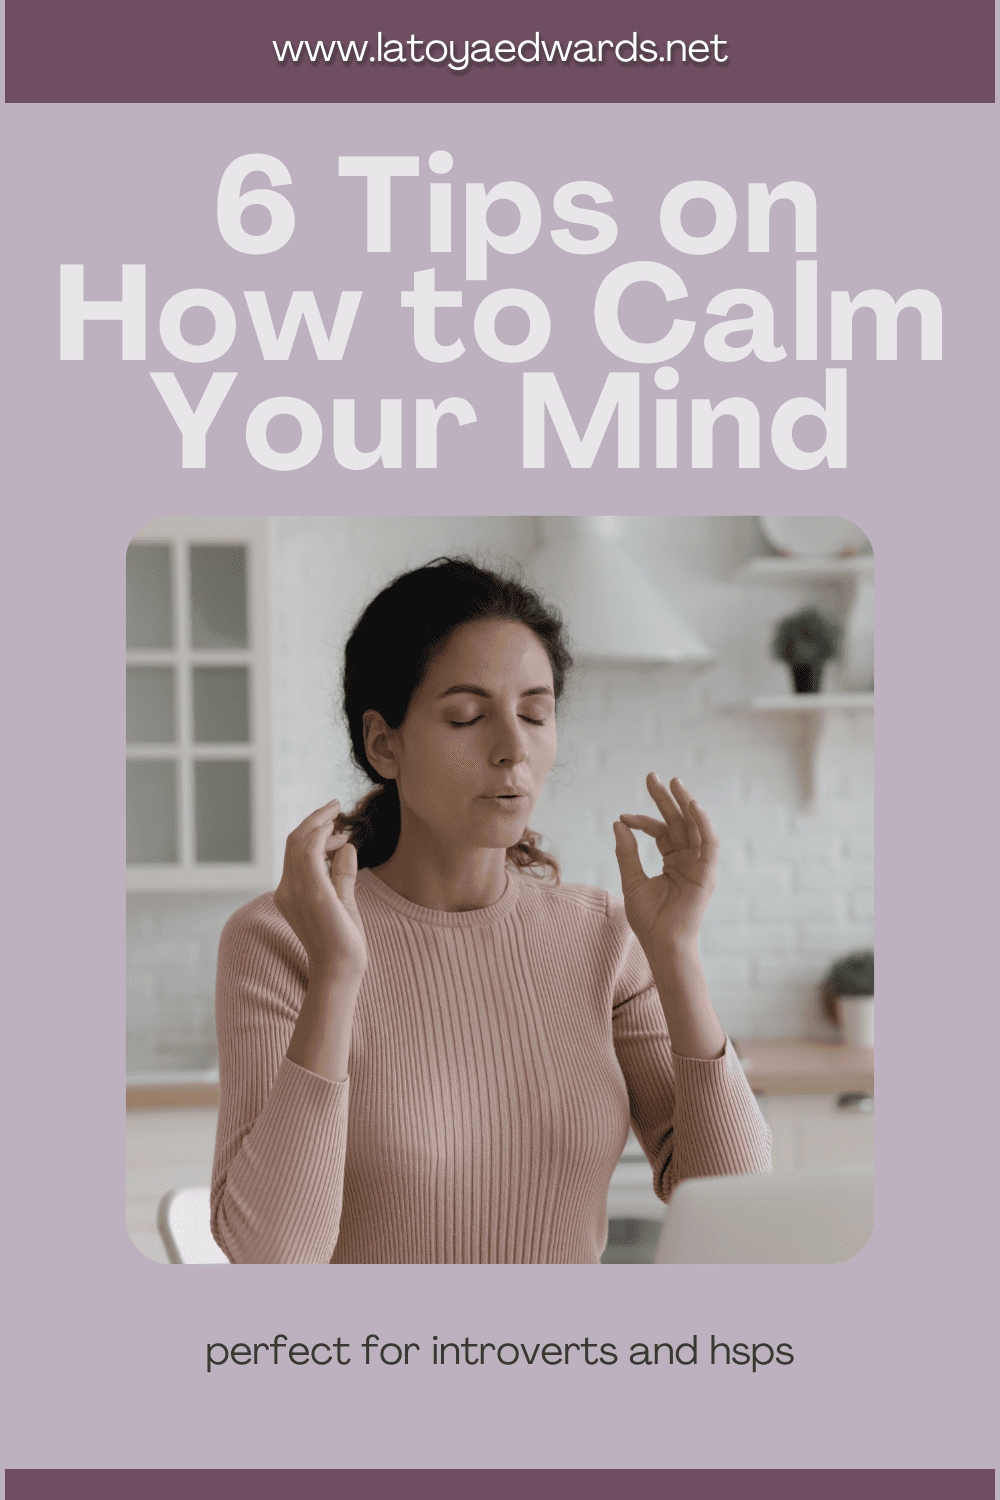 Are you looking for ways to calm your thoughts? Learn 6 practical examples of how to clear your mind of negative thoughts. Introverted thinking goes deep but that can sometimes lead down the road to overthinking and highly sensitive person burnout. If you're looking for some helpful mindfulness activities visit the full blog post to read more.